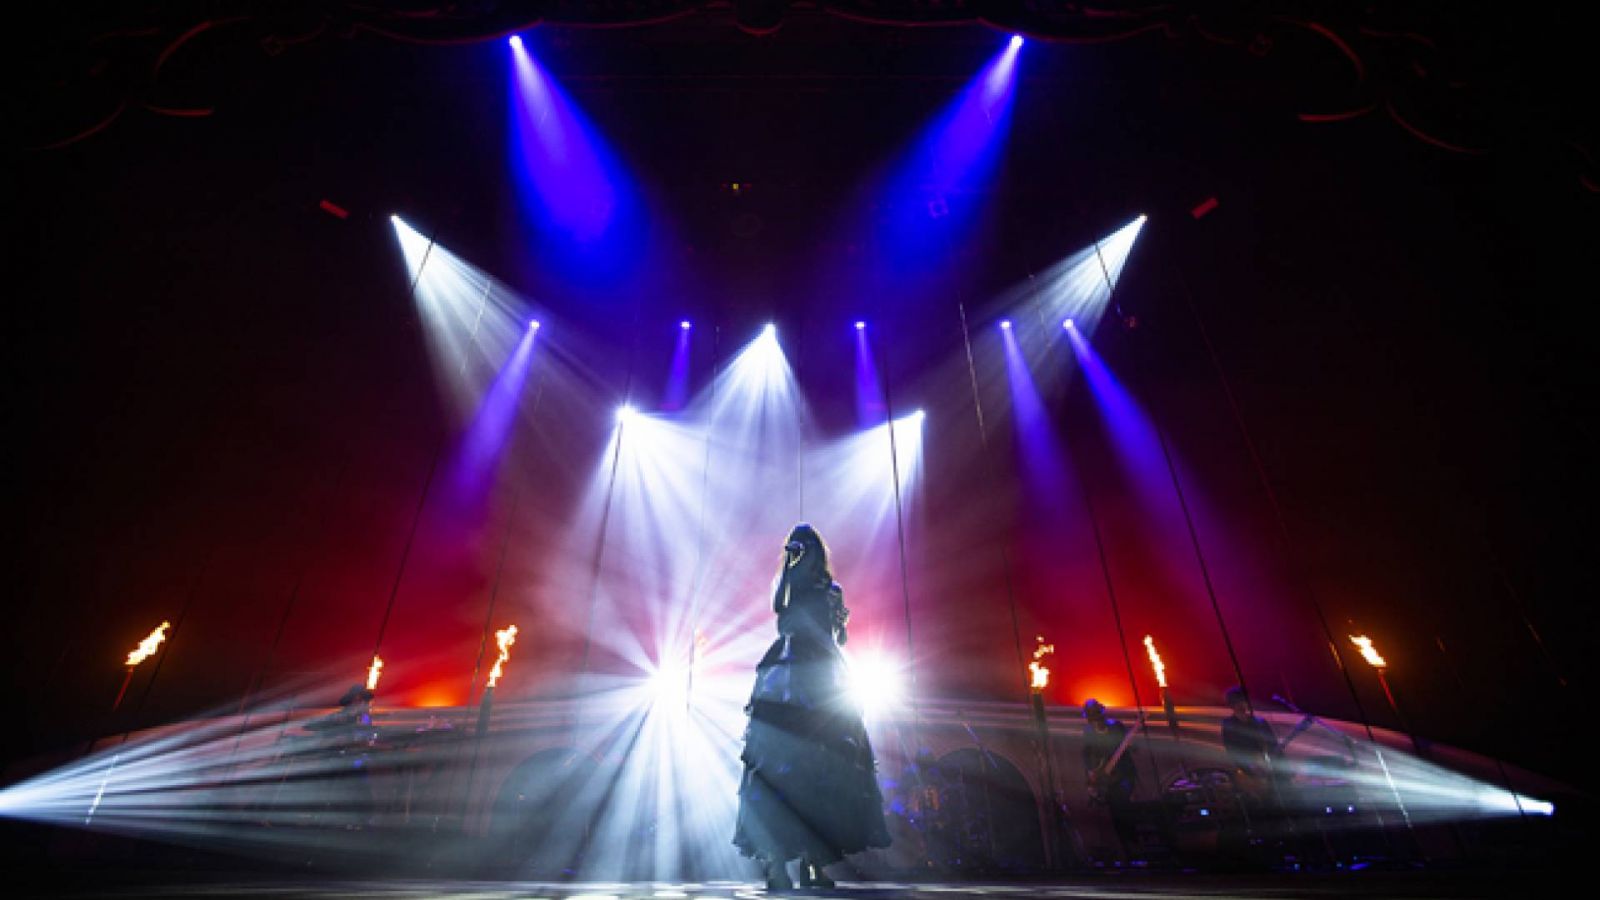 Aimer Hall Tour 18/19 "soleil et pluie" at Tokyo International Forum © SonyMusic. All rights reserved.